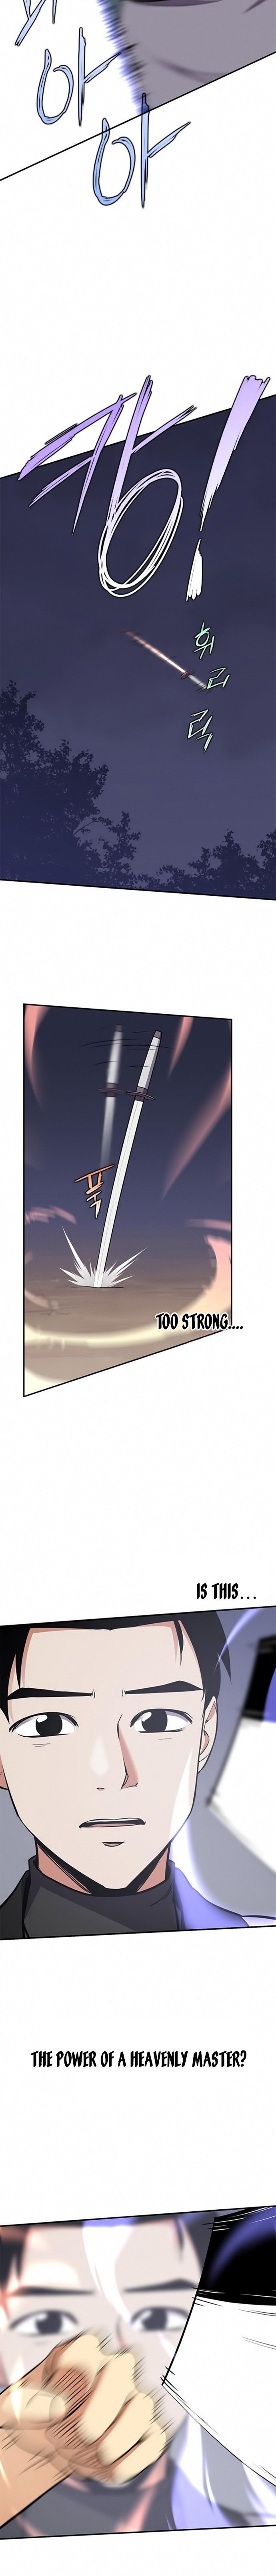 The Strongest Ever Chapter 29 page 11